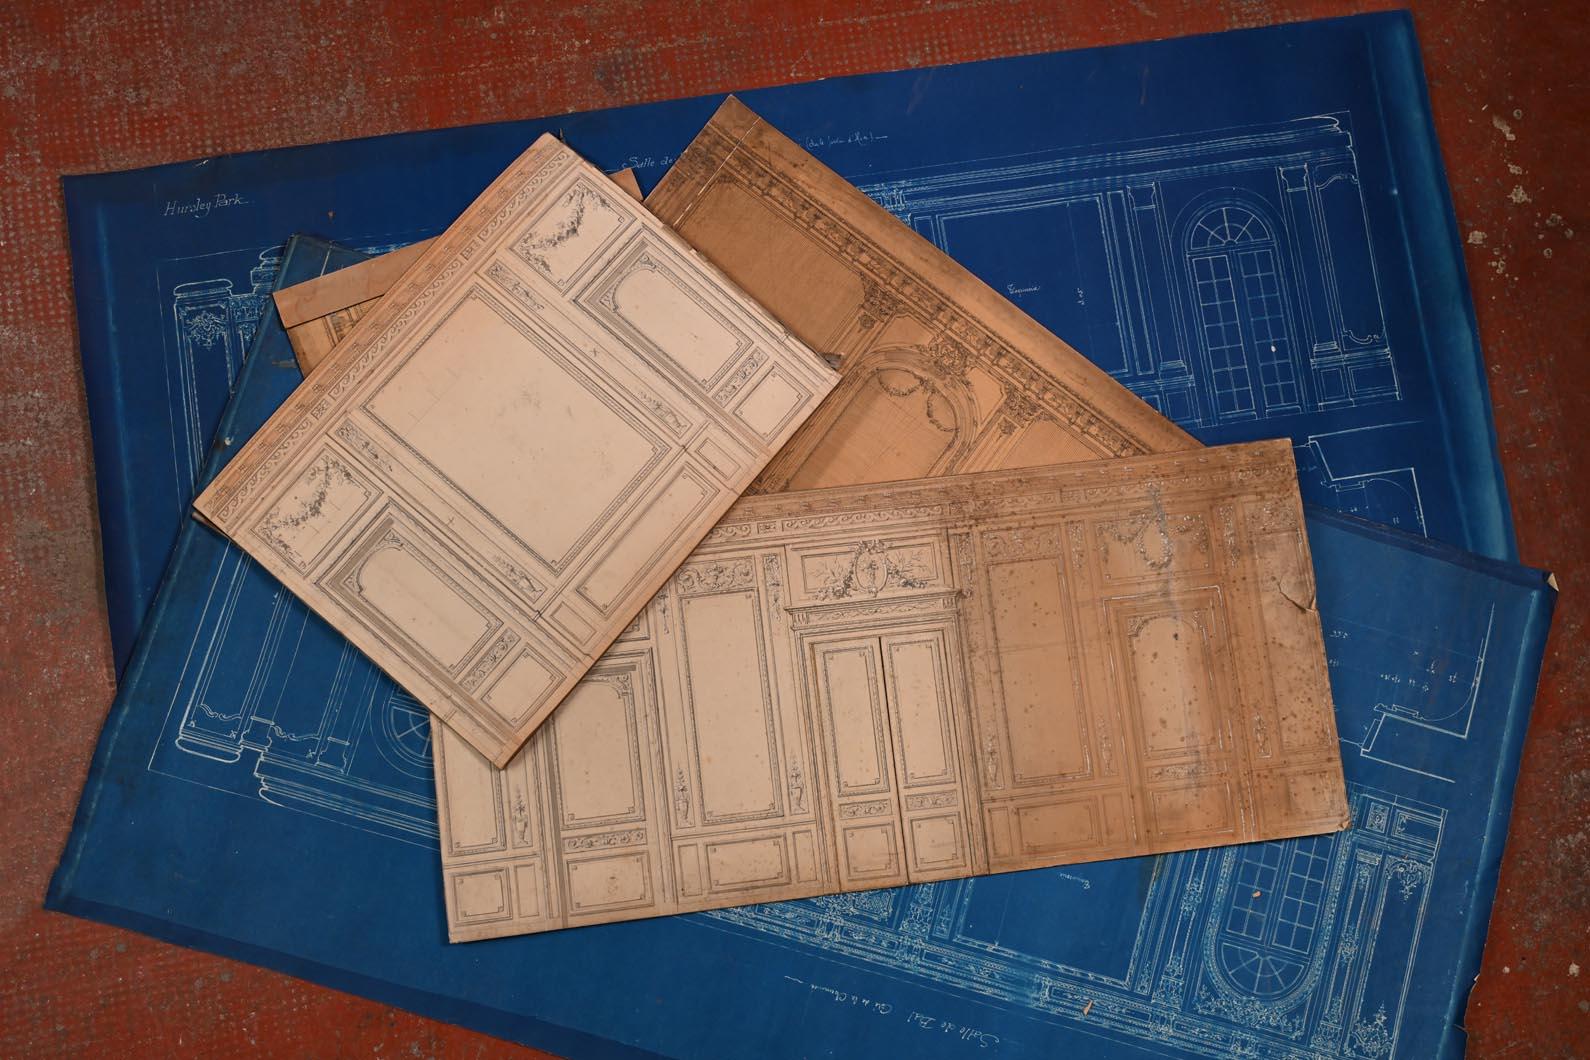 This set of model elements accompanied by plans constitutes part of the project to redevelop the Hursley Park mansion, also called ， commissioned by the Coopers family who acquired it in 1902. The project is entrusted to the architect Scottish